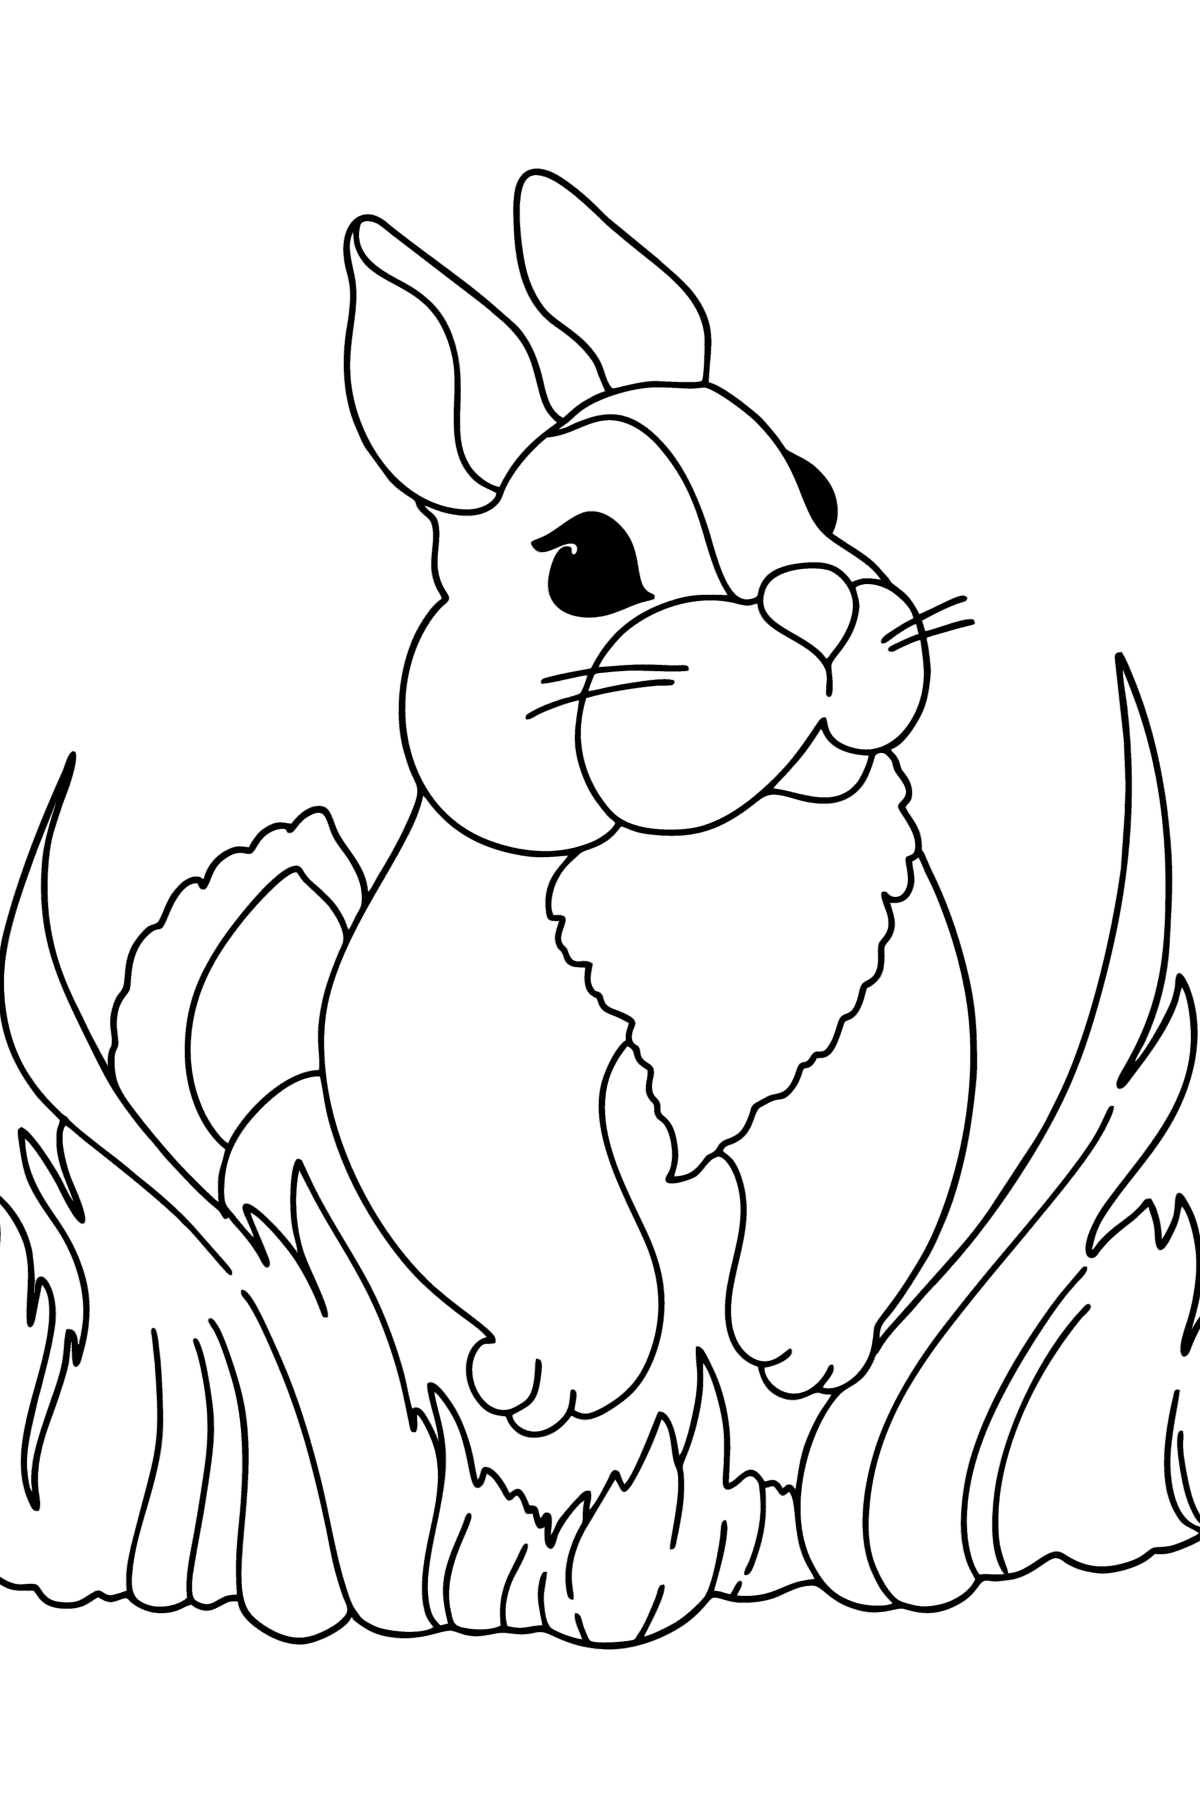 Fluffy Bunny Coloring page - Coloring Pages for Kids